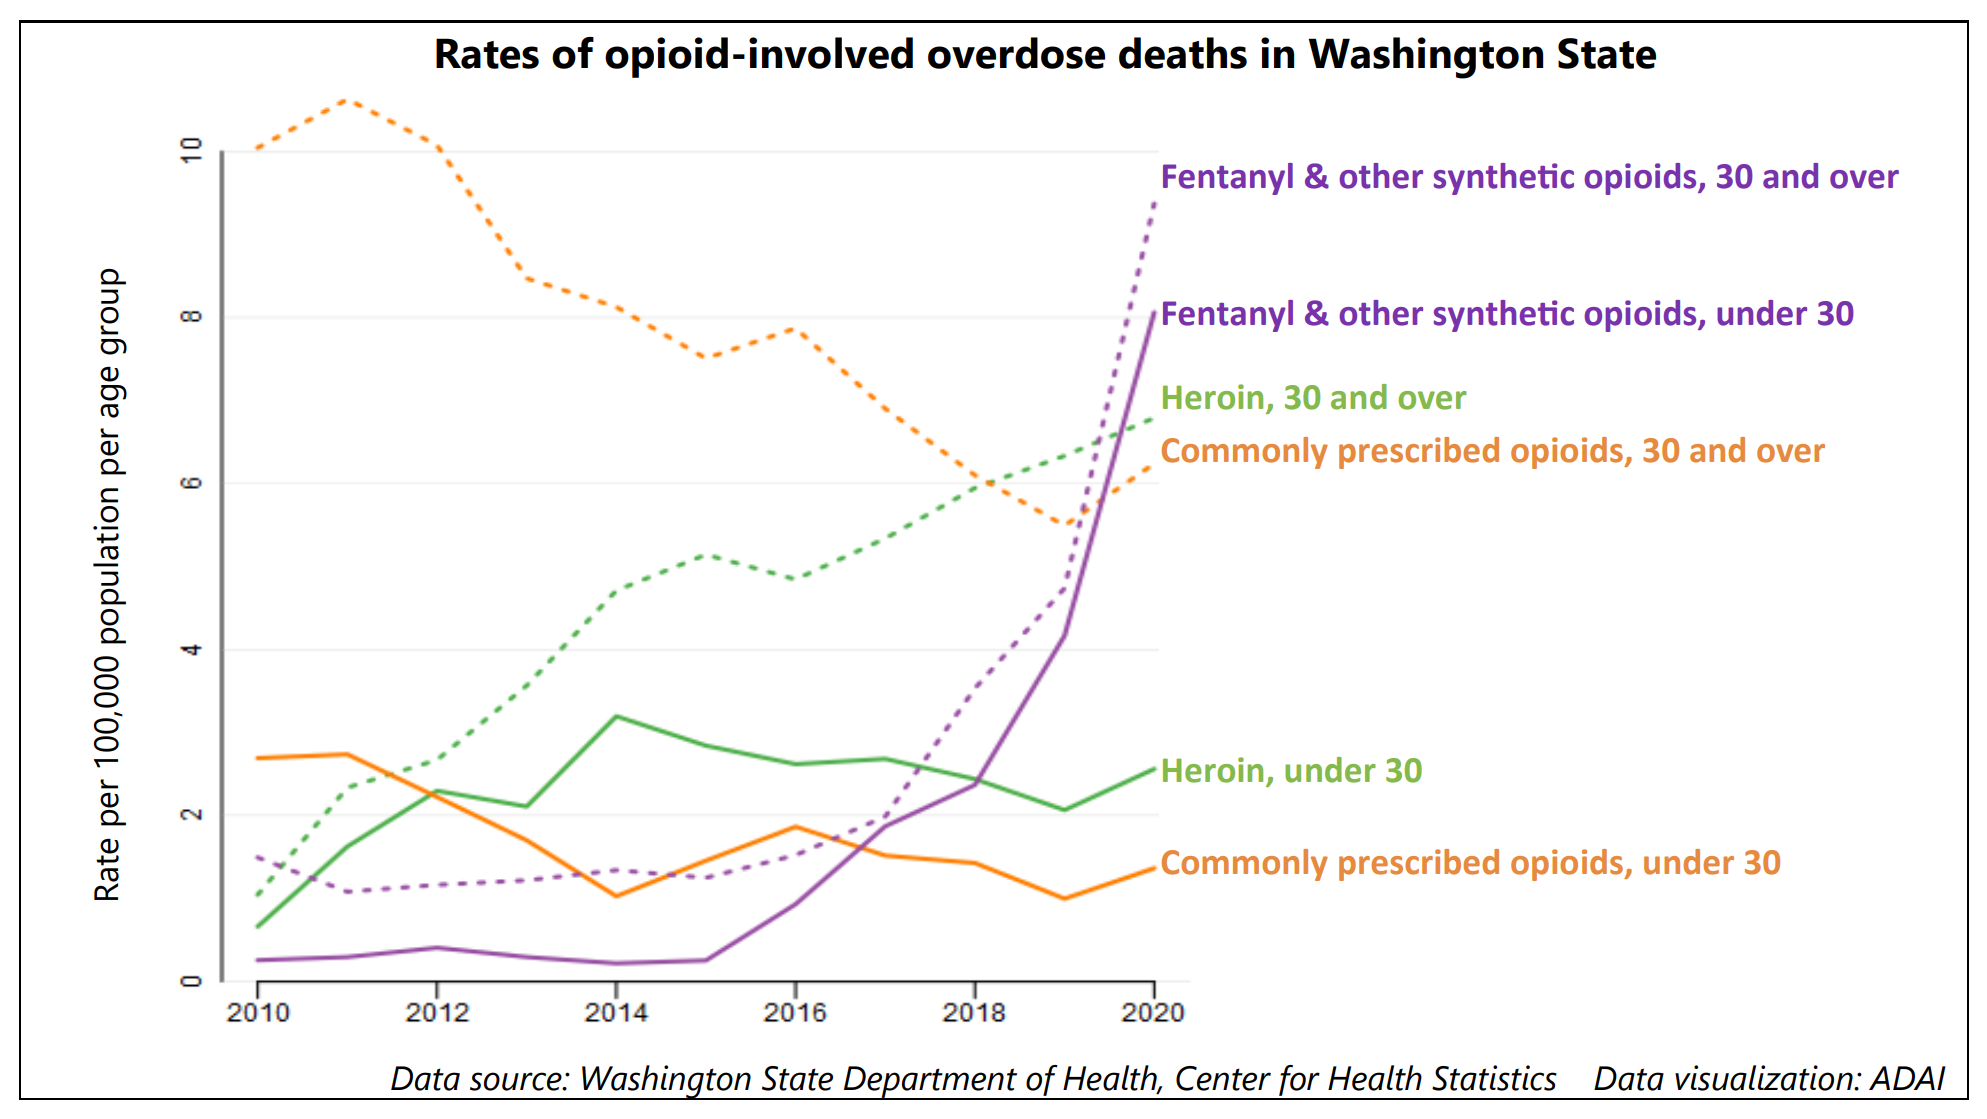 Rates of opioid-involved overdose deaths in Washington State, 2010-2020. Fentanyl-involved deaths among those under 30 (purple solid line) first increased in 2016. By 2019, fentanyl surpassed the other opioid categories in overdose deaths of those under 30 with a rate of 4/100,000 that then doubled to 8/100,000 in 2020. Data: Washington State Department of Health, Center for Health Statistics. Graphic: ADAI